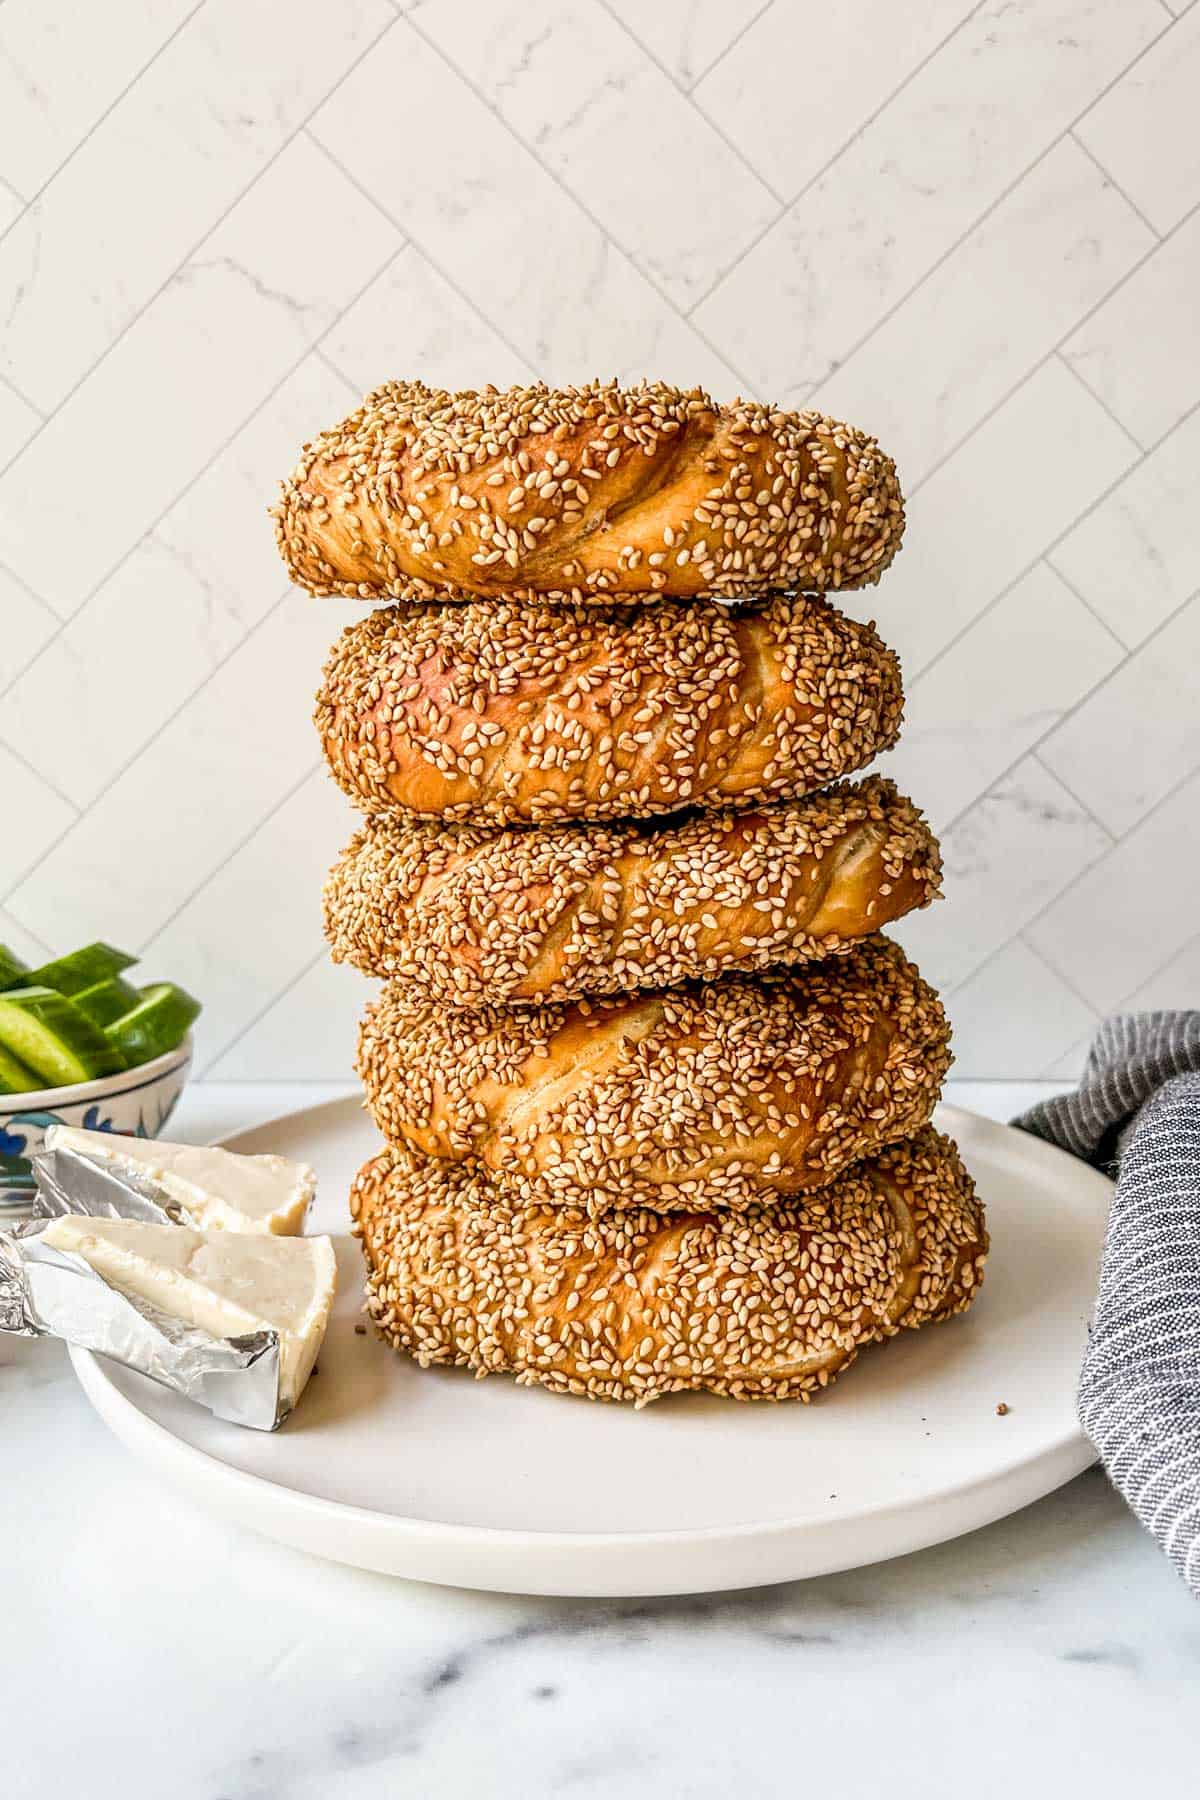 A stack of simit on a white plate.